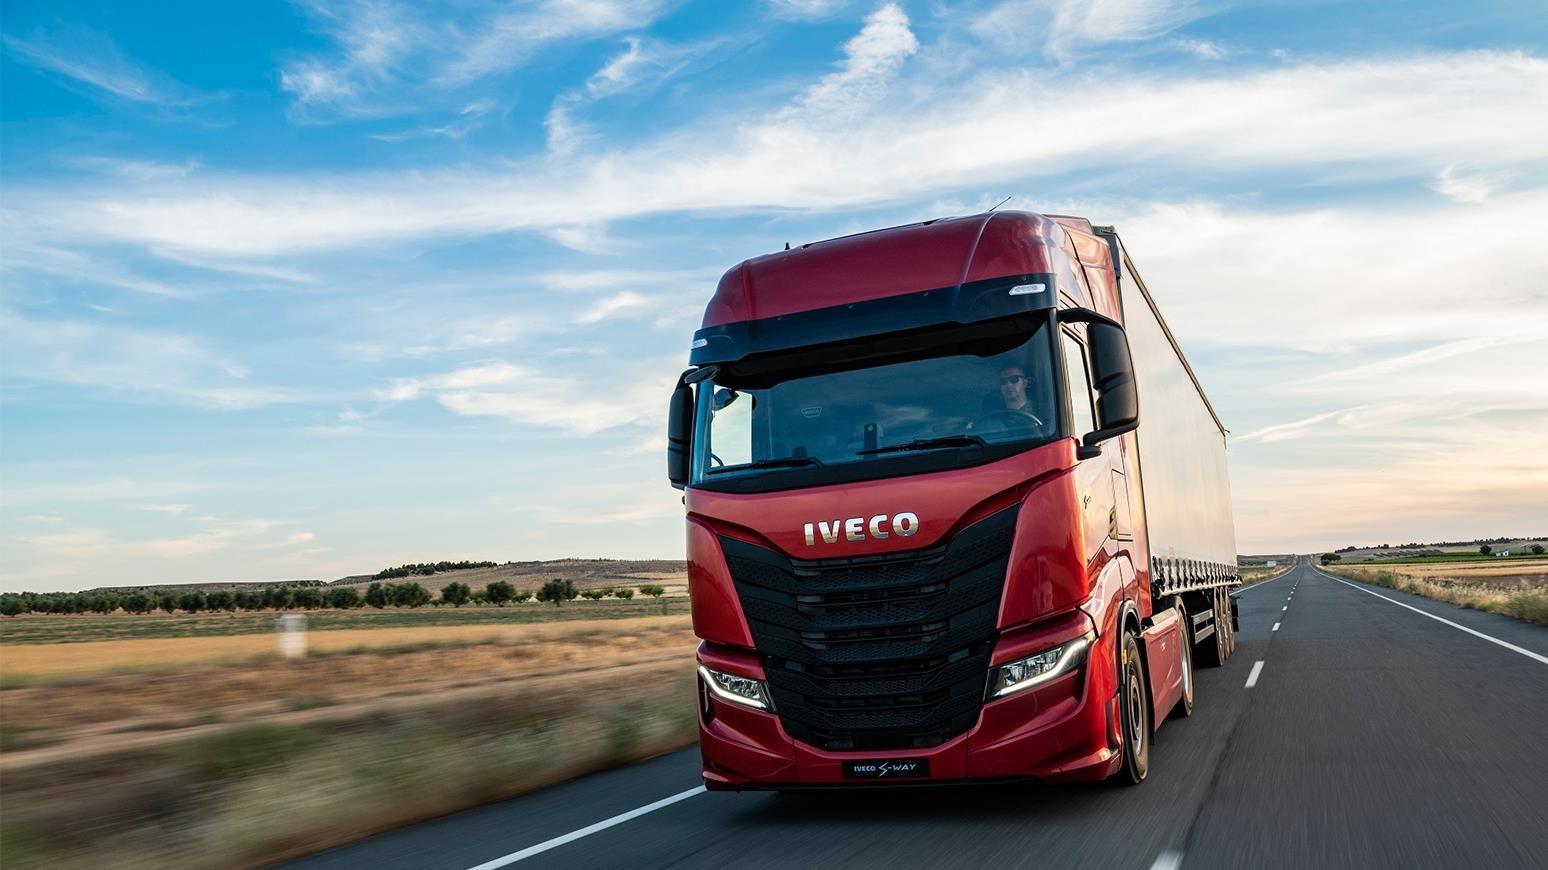 IVECO Highlights Innovations, Connectivity & Sustainability At SOLUTRANS 2019 In Lyon, France